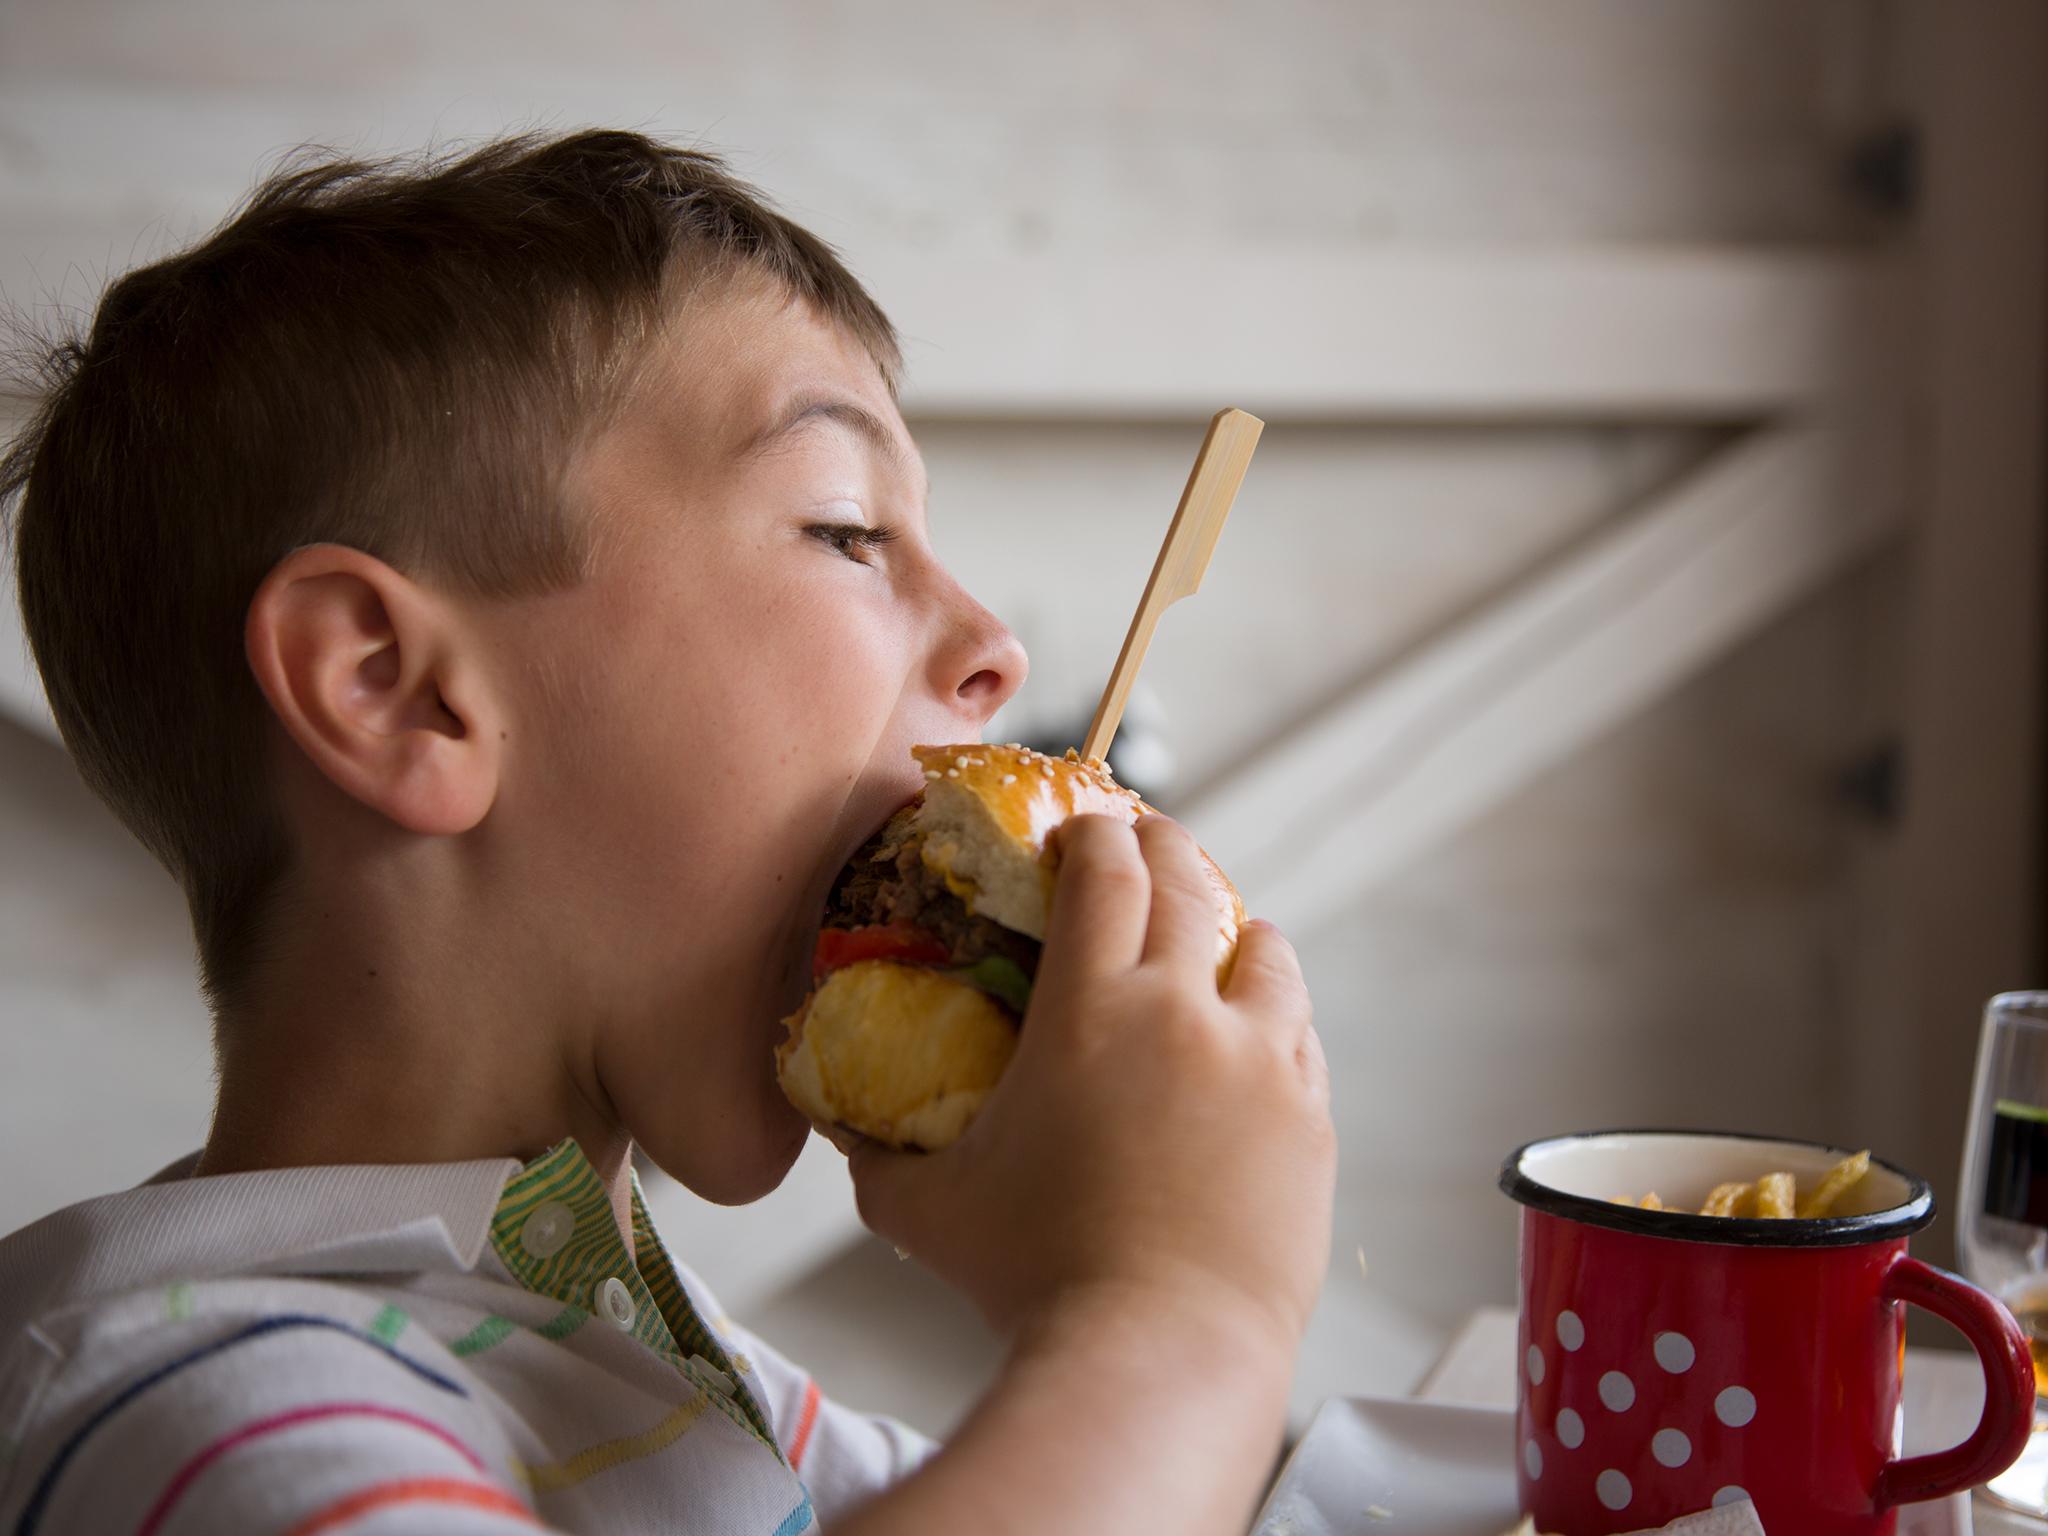 Bite the bullet: The parental fear of upsetting a child has become a barrier to healthy portion control at home